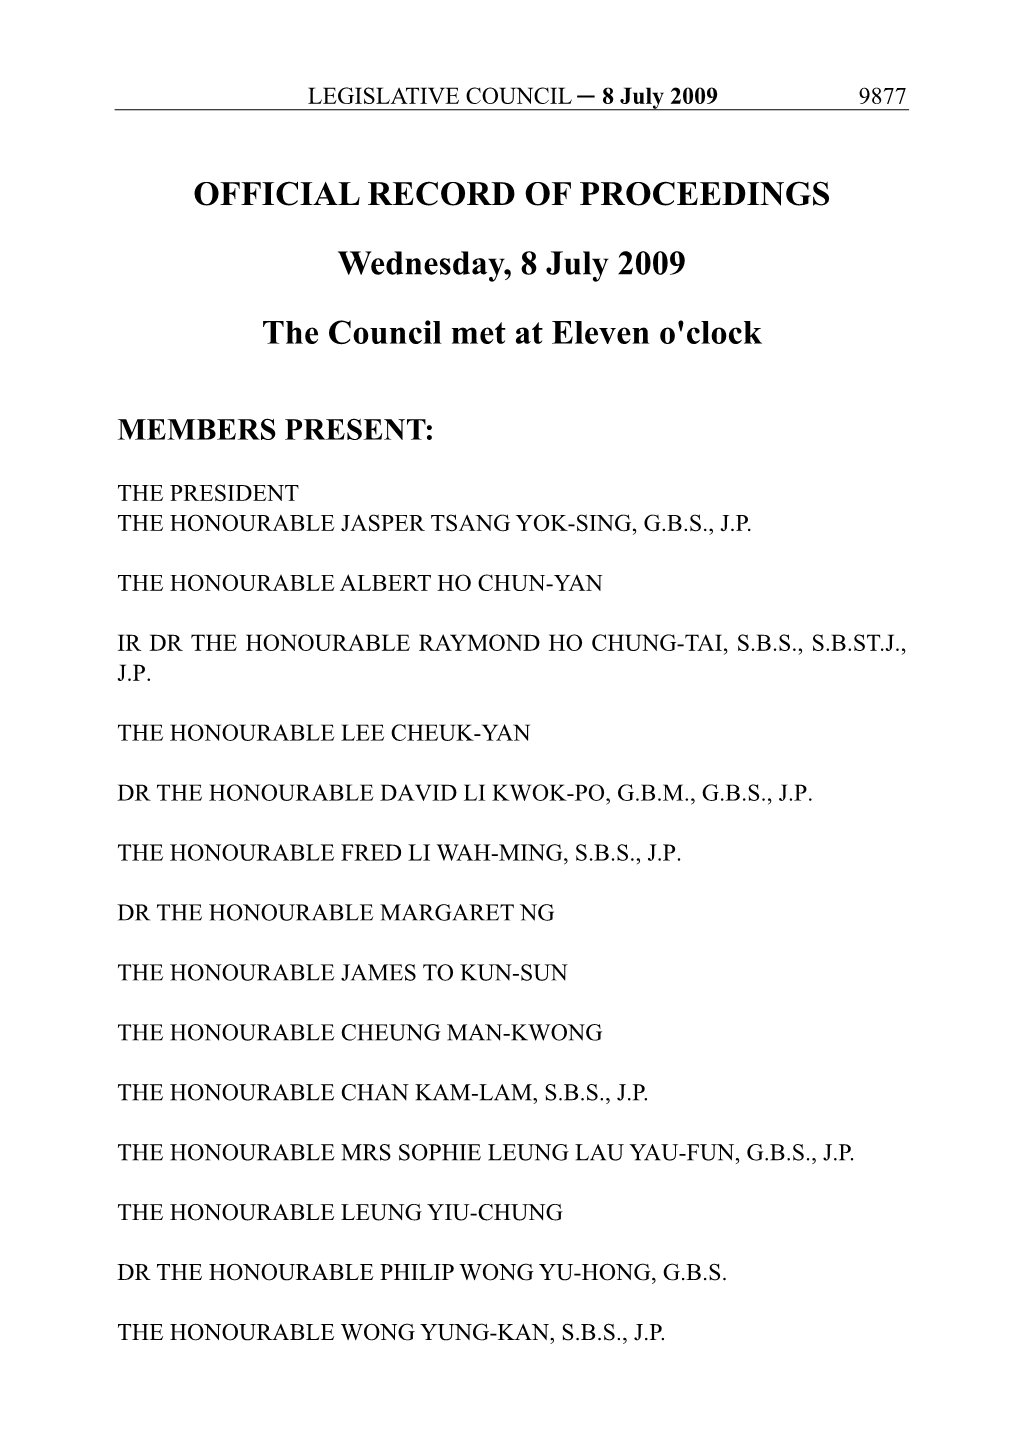 OFFICIAL RECORD of PROCEEDINGS Wednesday, 8 July